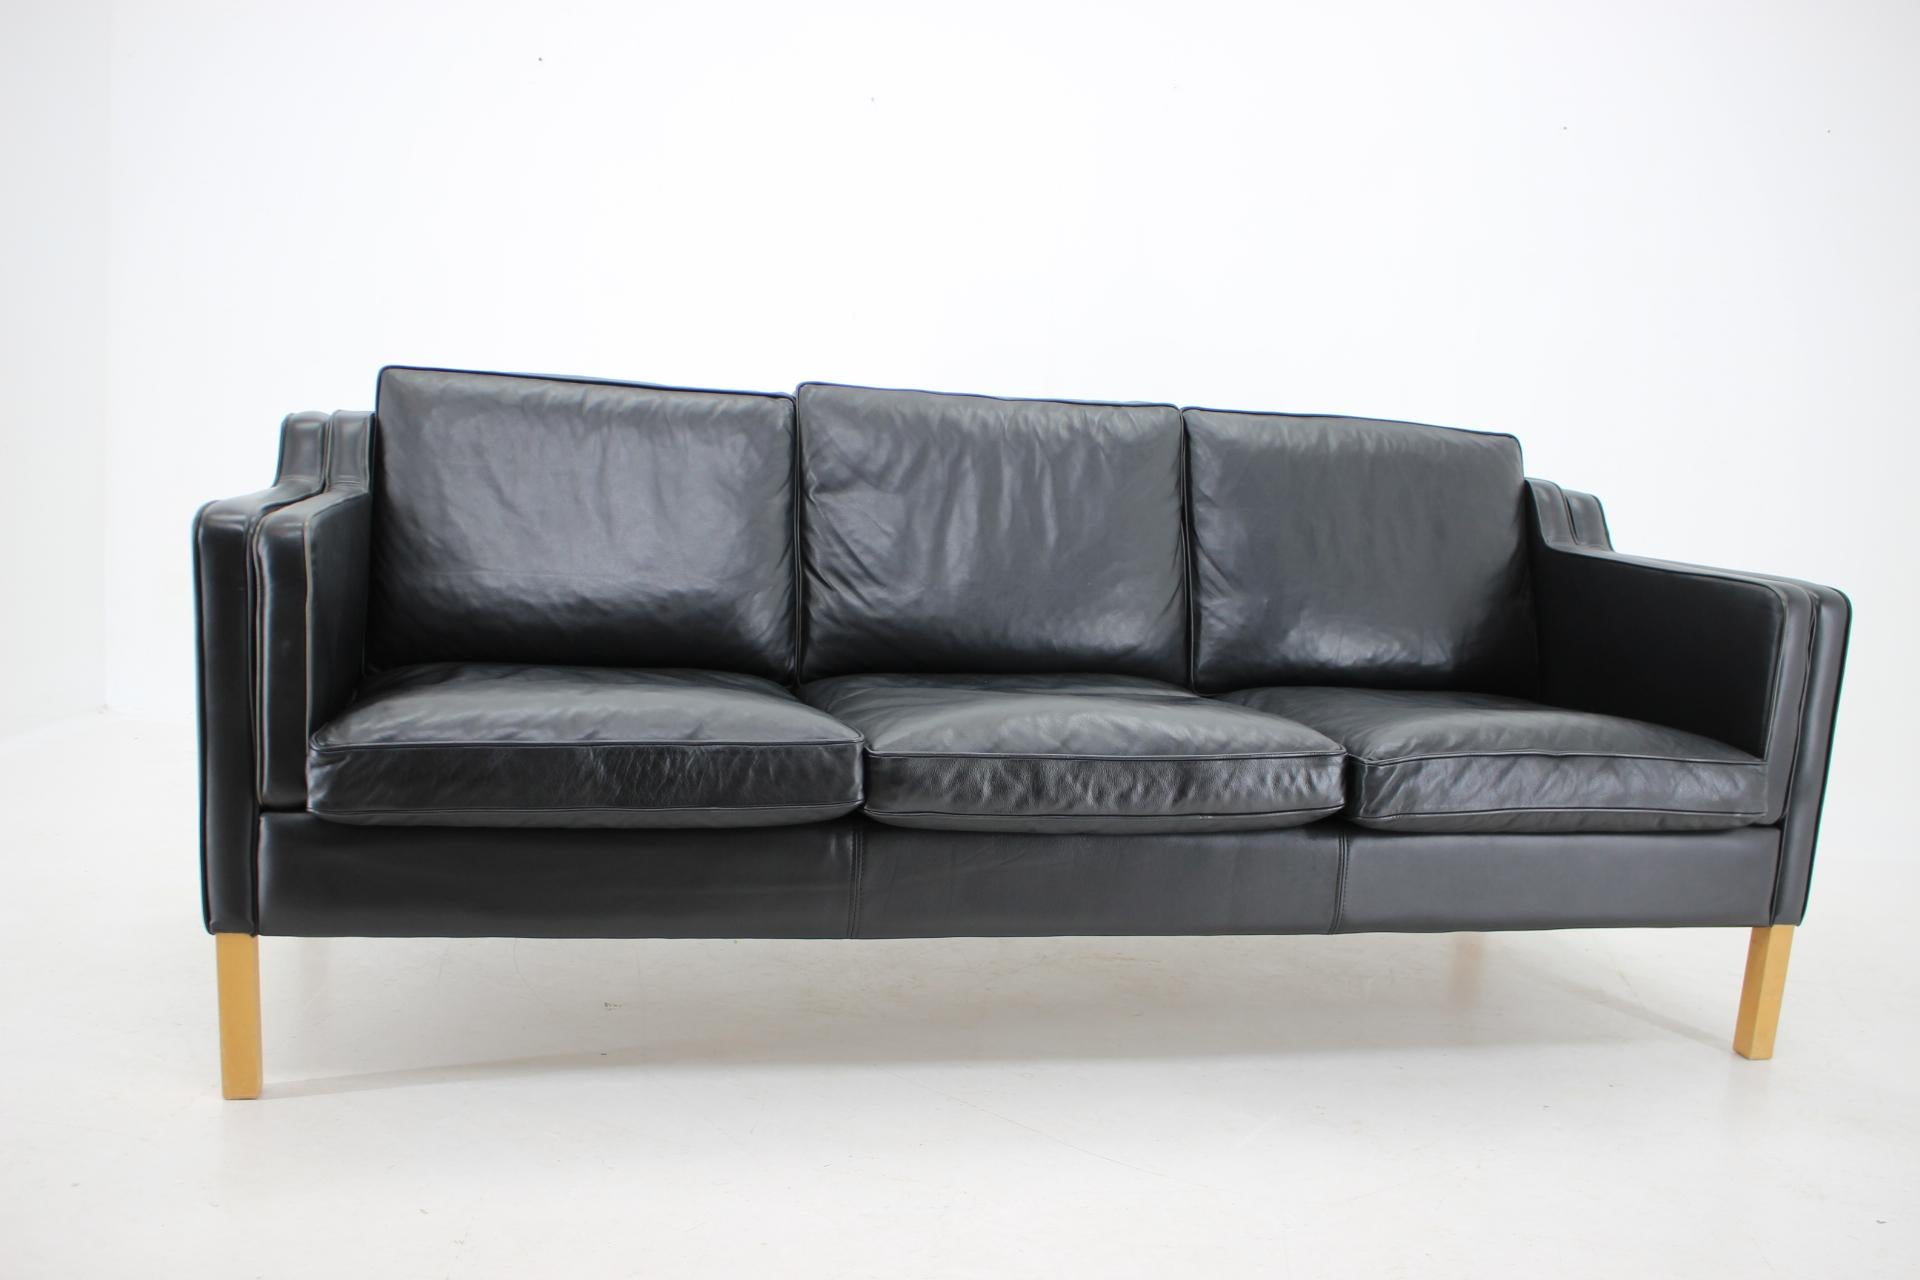 Danish 1970s Black Leather Three Seater Sofa by Stouby, Denmark